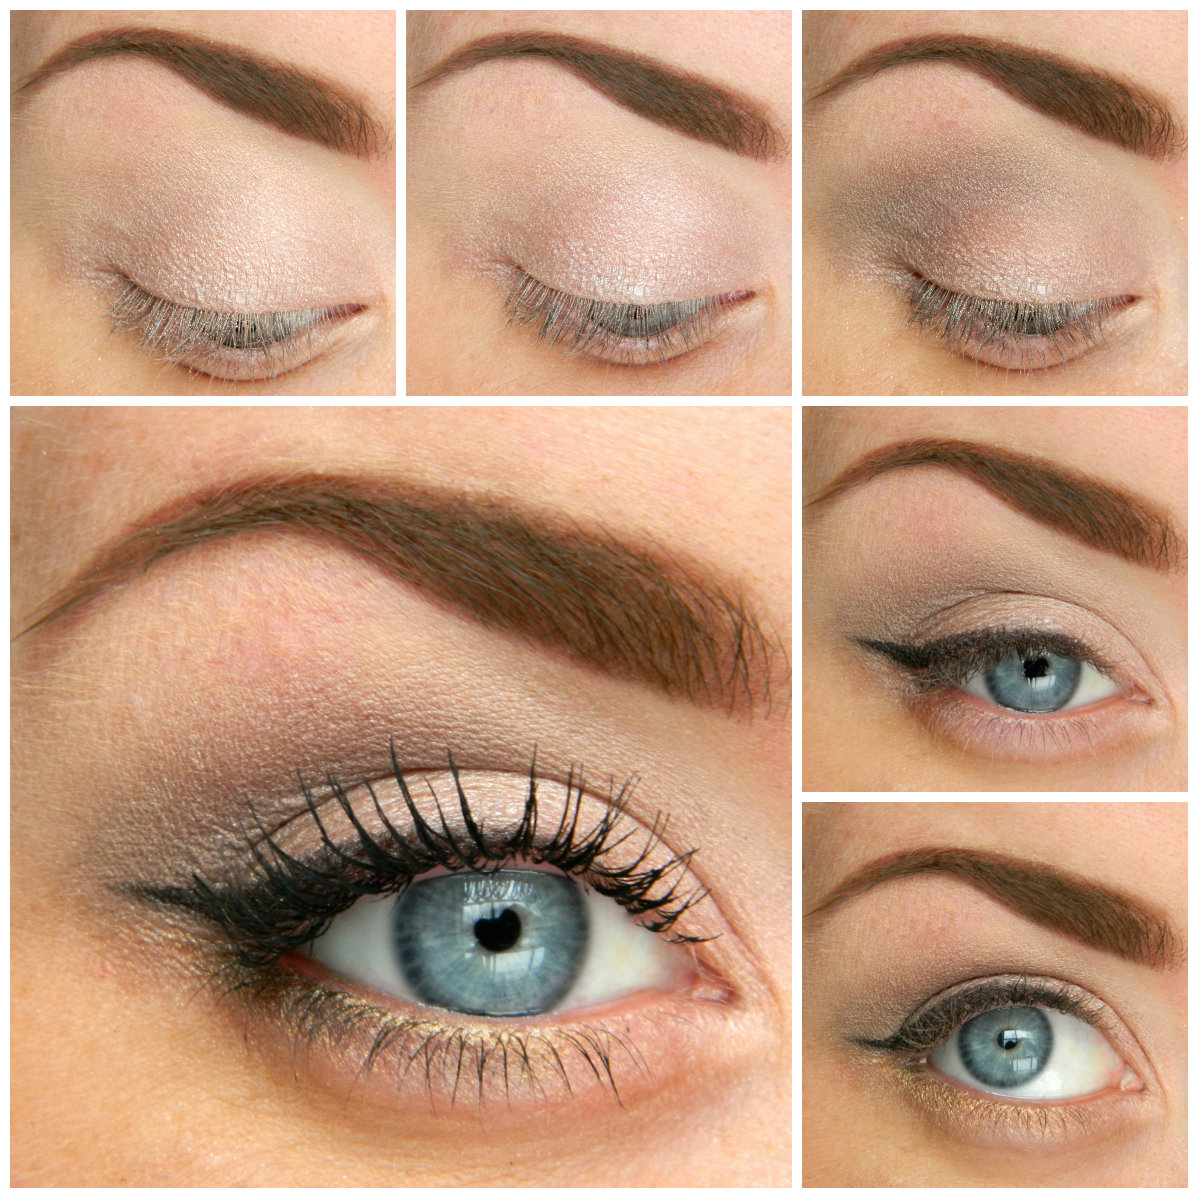 Makeup That Looks Good With Blue Eyes 5 Ways To Make Blue Eyes Pop With Proper Eye Makeup Her Style Code